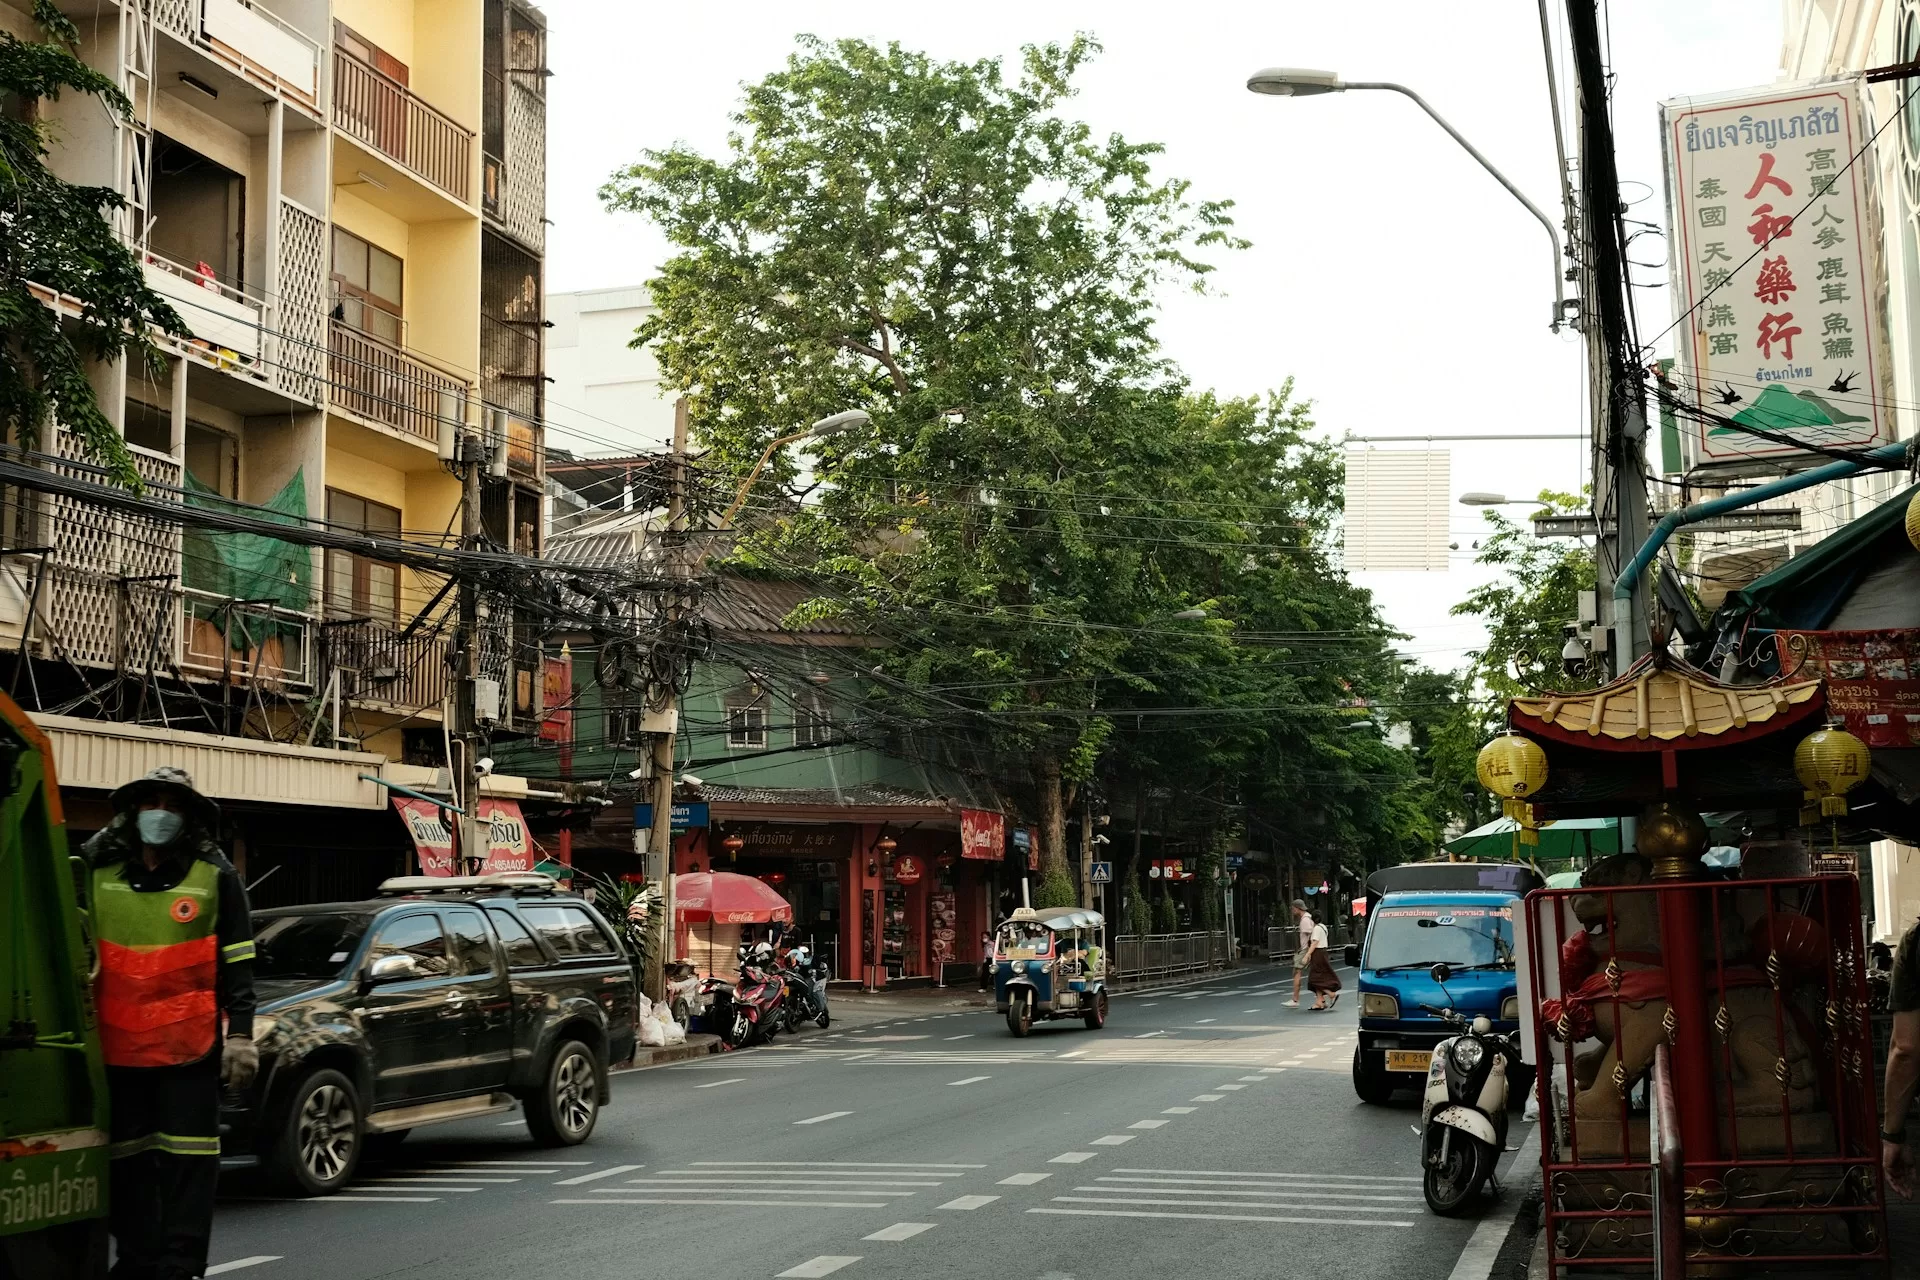 Where to Live in Bangkok? The Best Neighborhoods for Expats